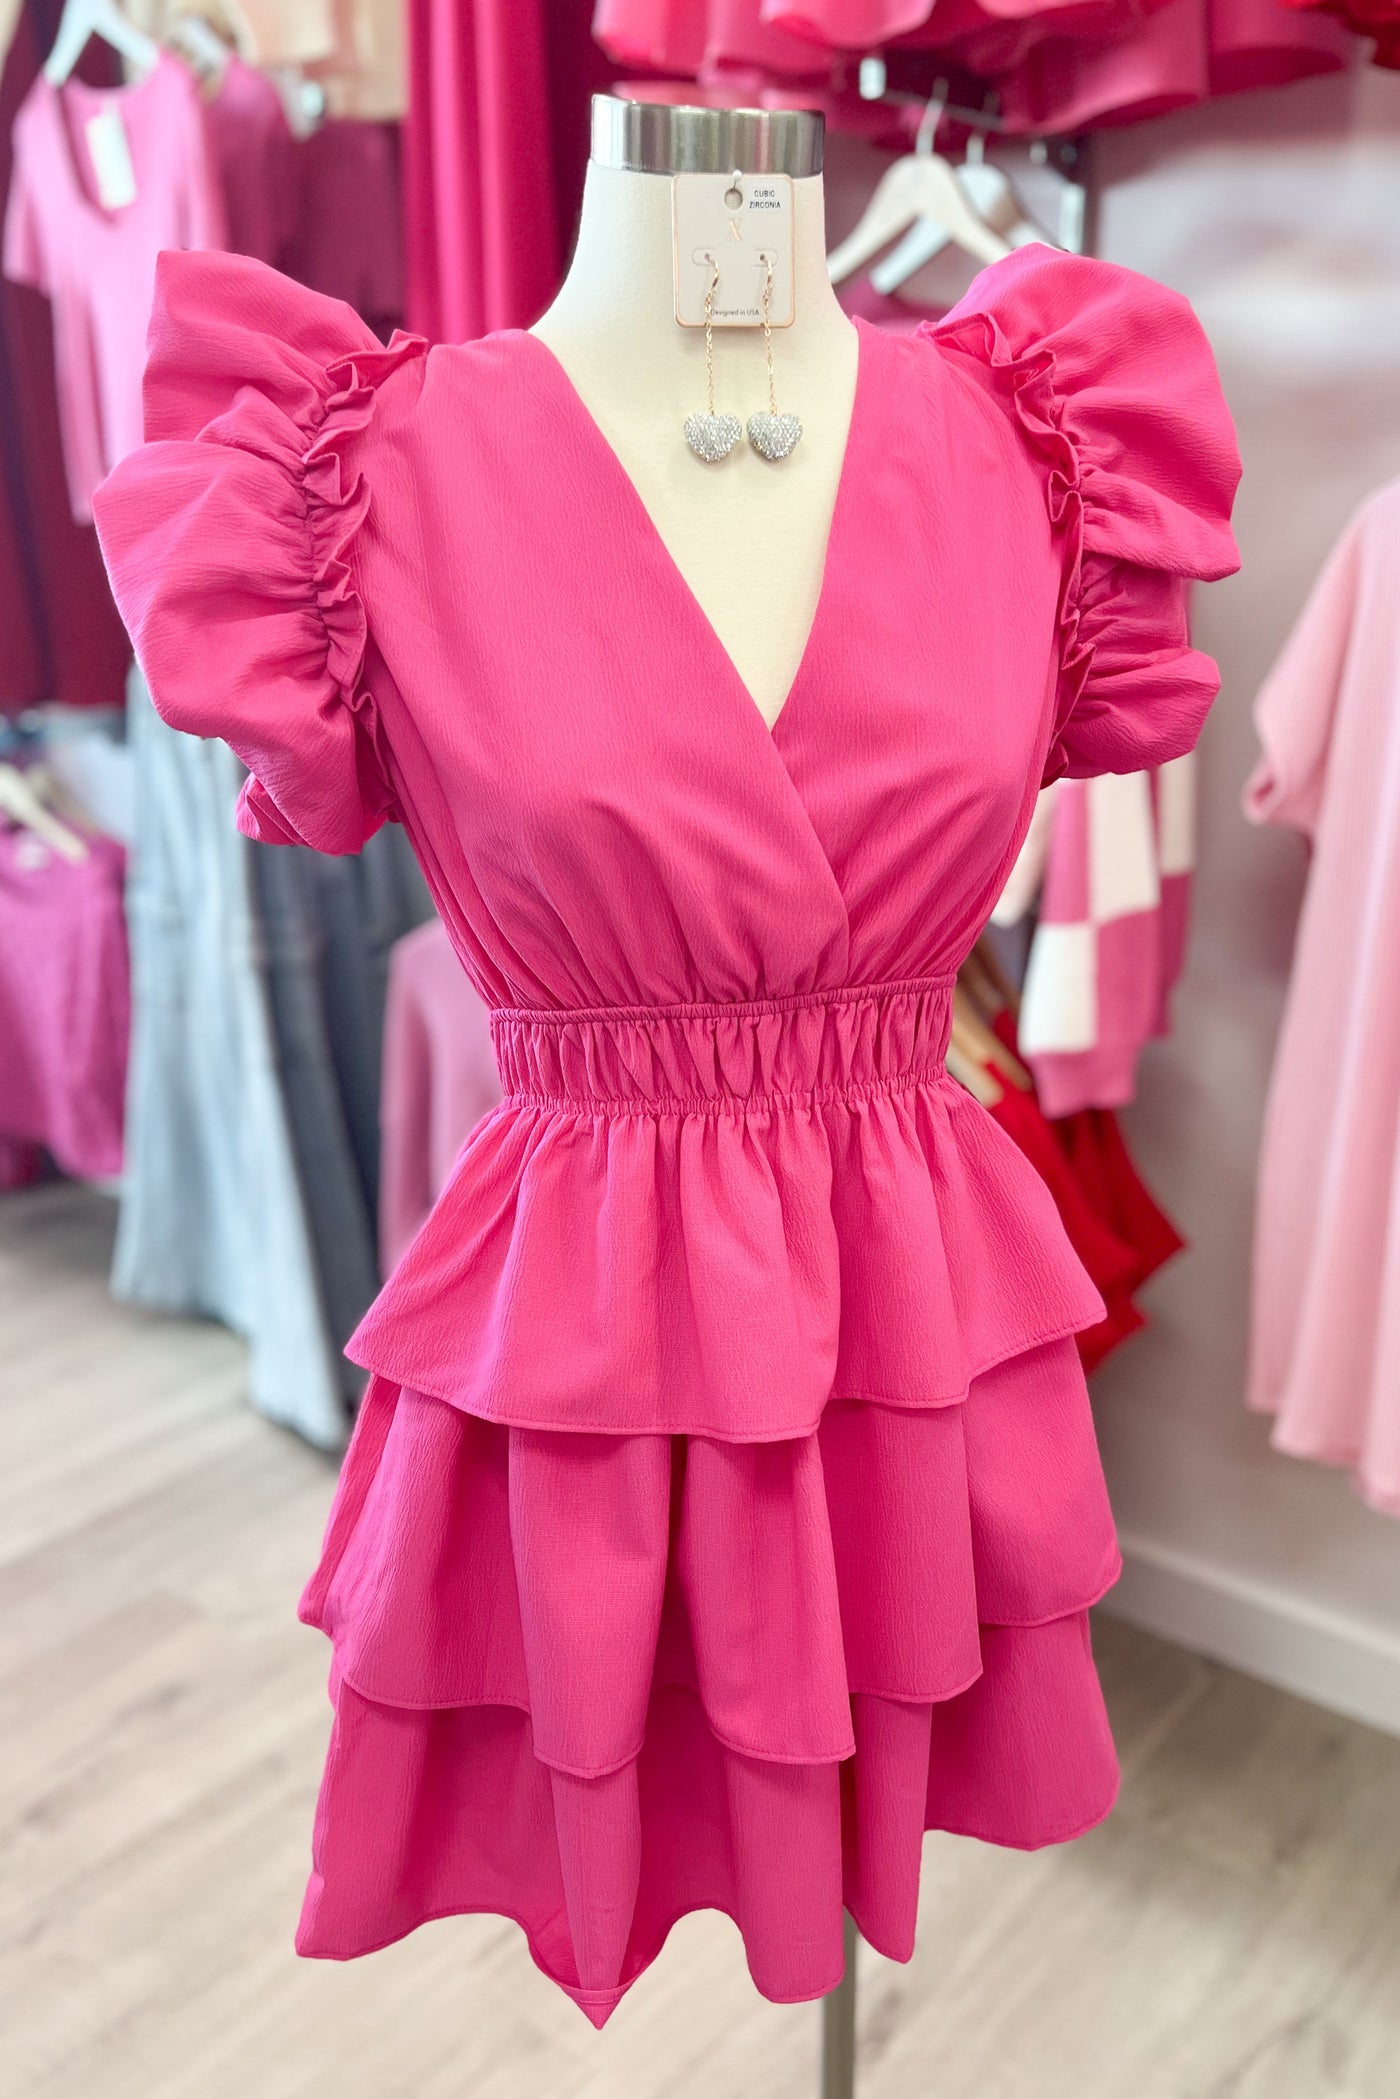 "All Ruffled Up" Dress (Pink) - Happily Ever Aften